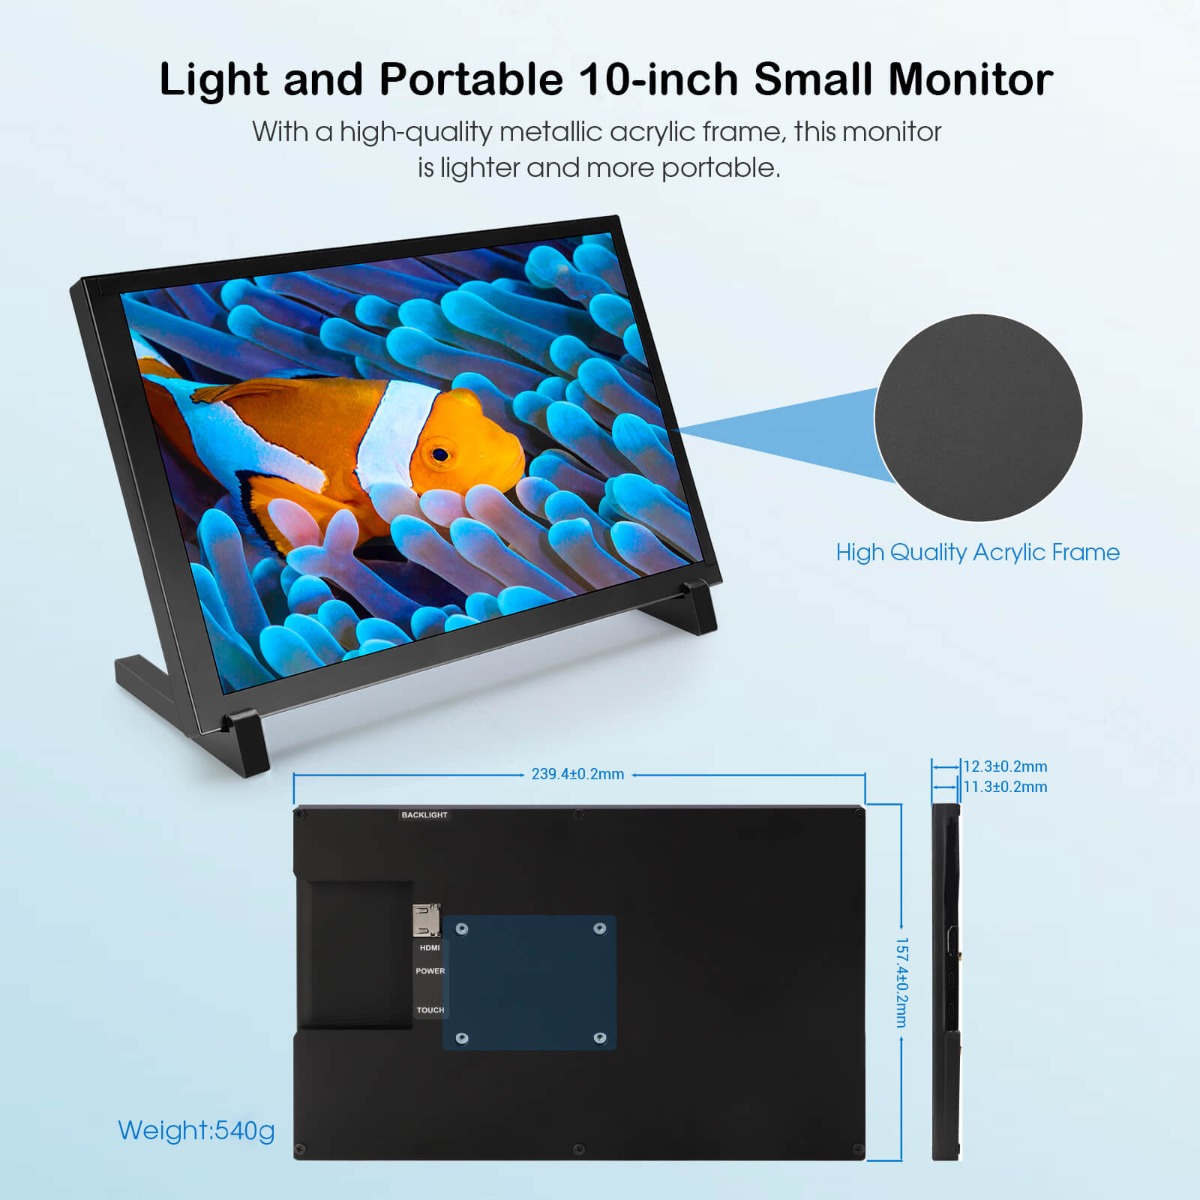 Light and Portable 10-inch little Monitor